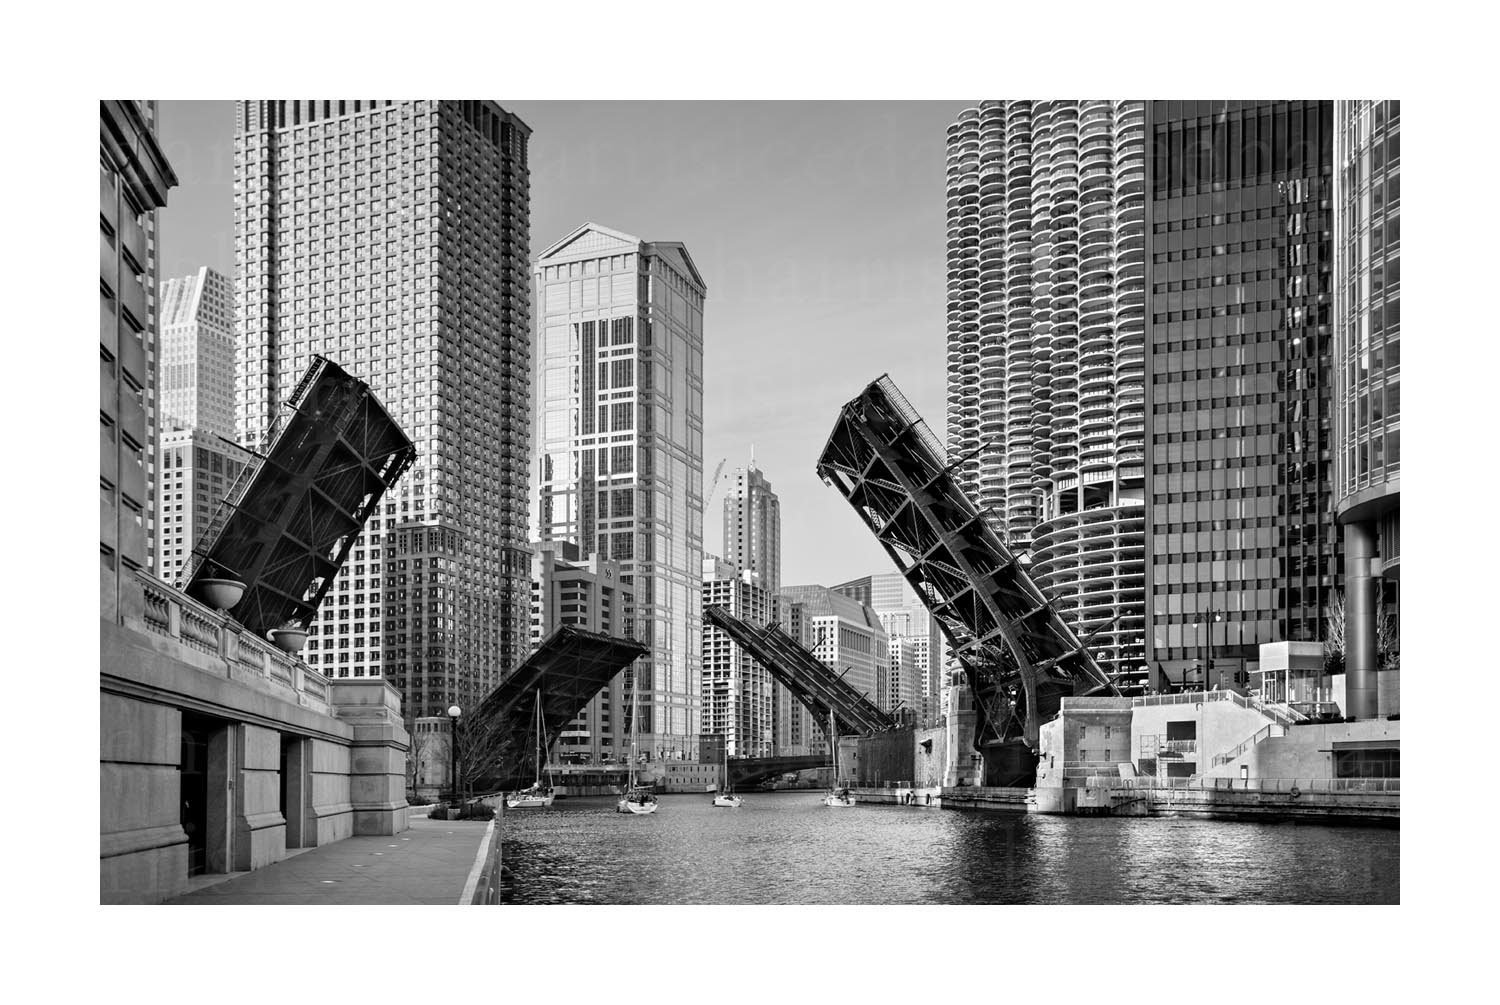 Wabash Avenue at the Chicago River, 2009